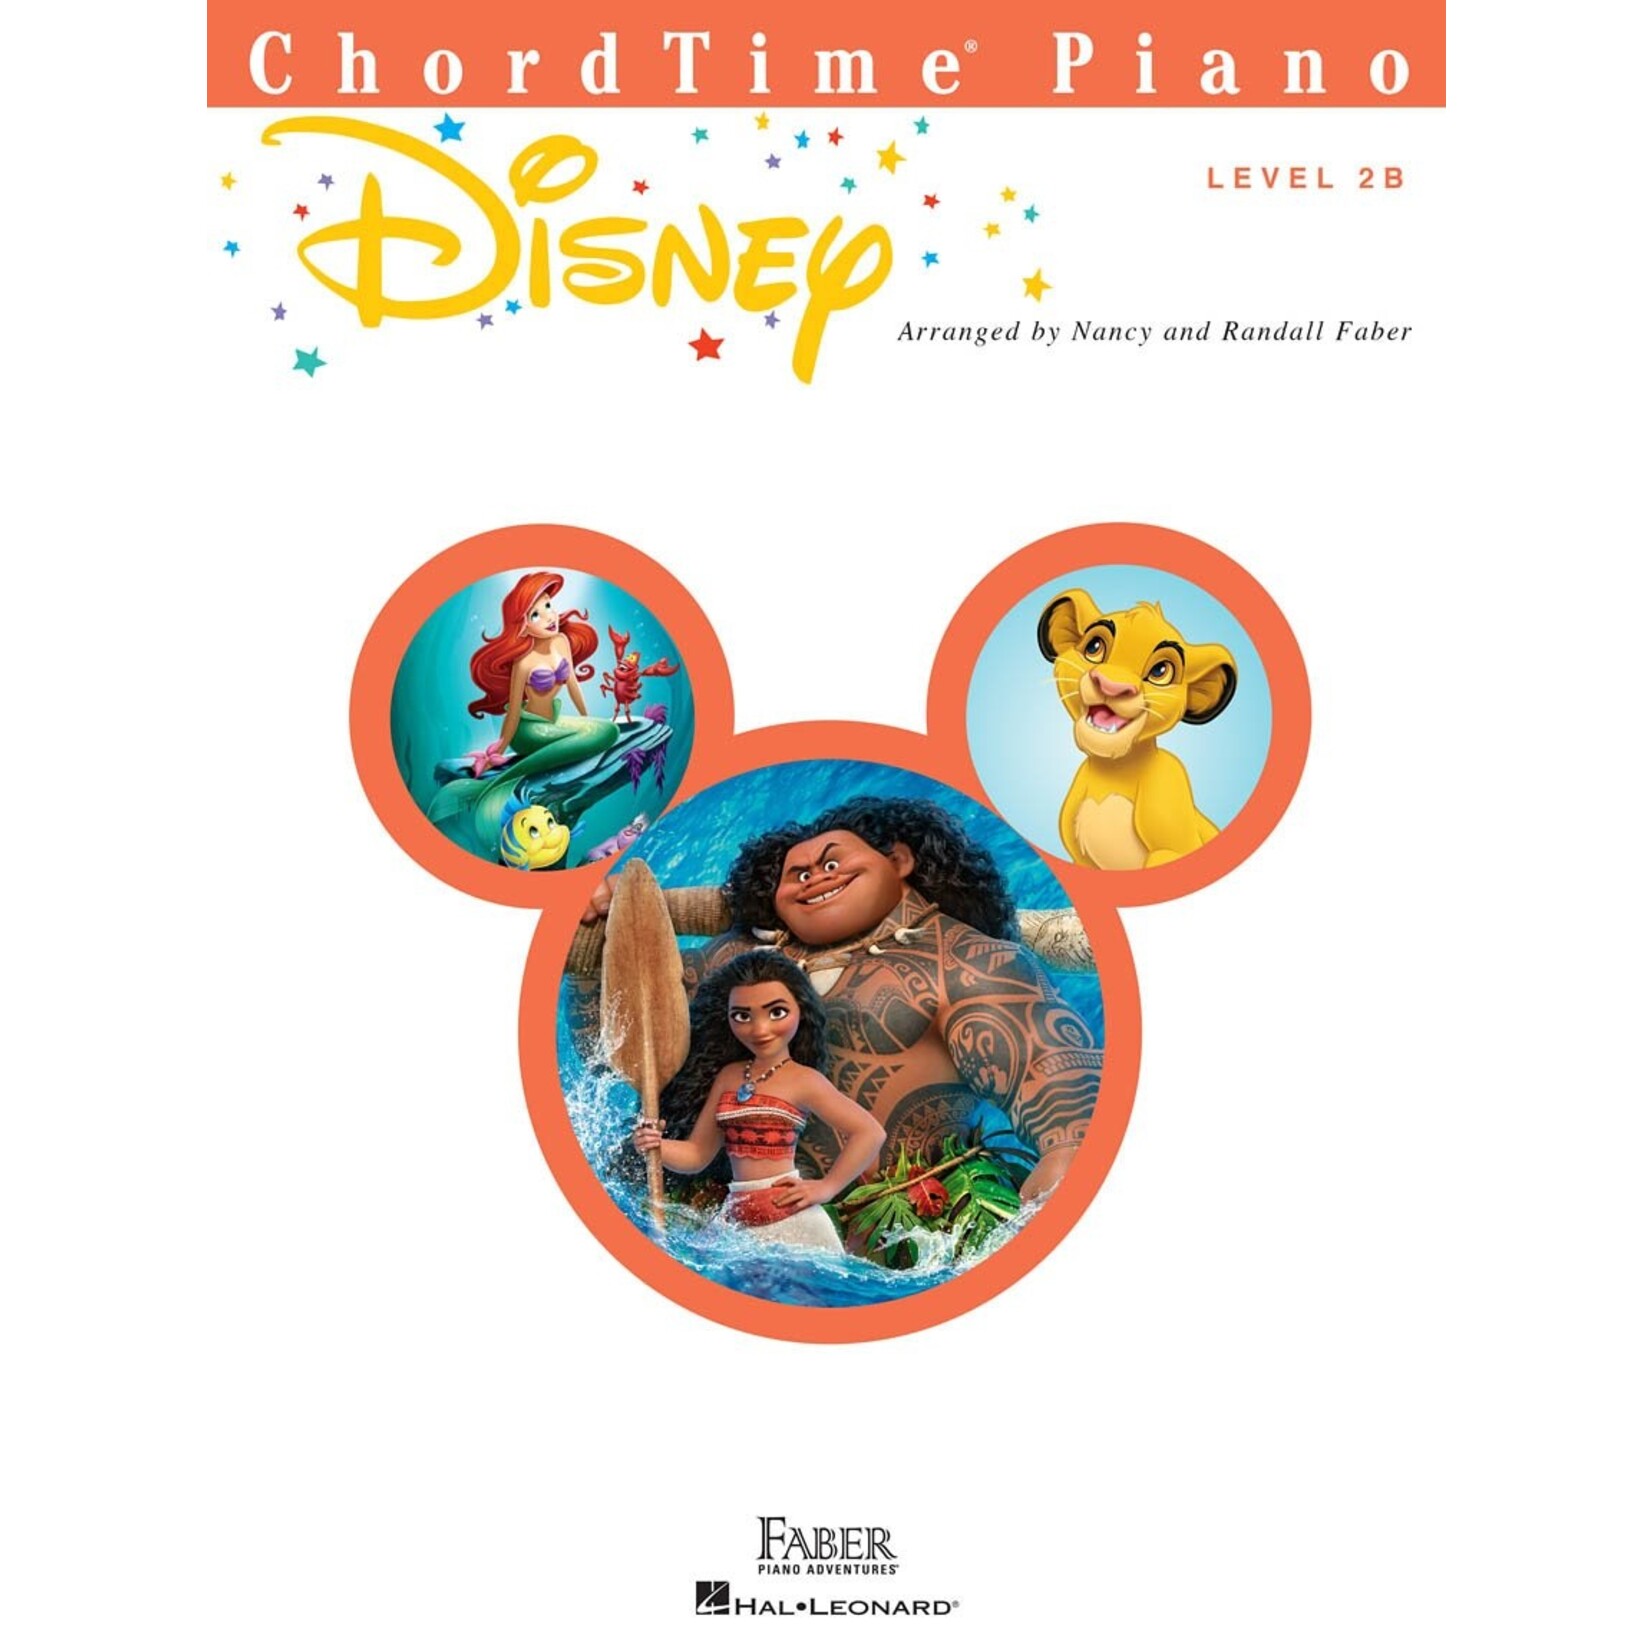 Faber Disney Chord Time Piano Level 2B